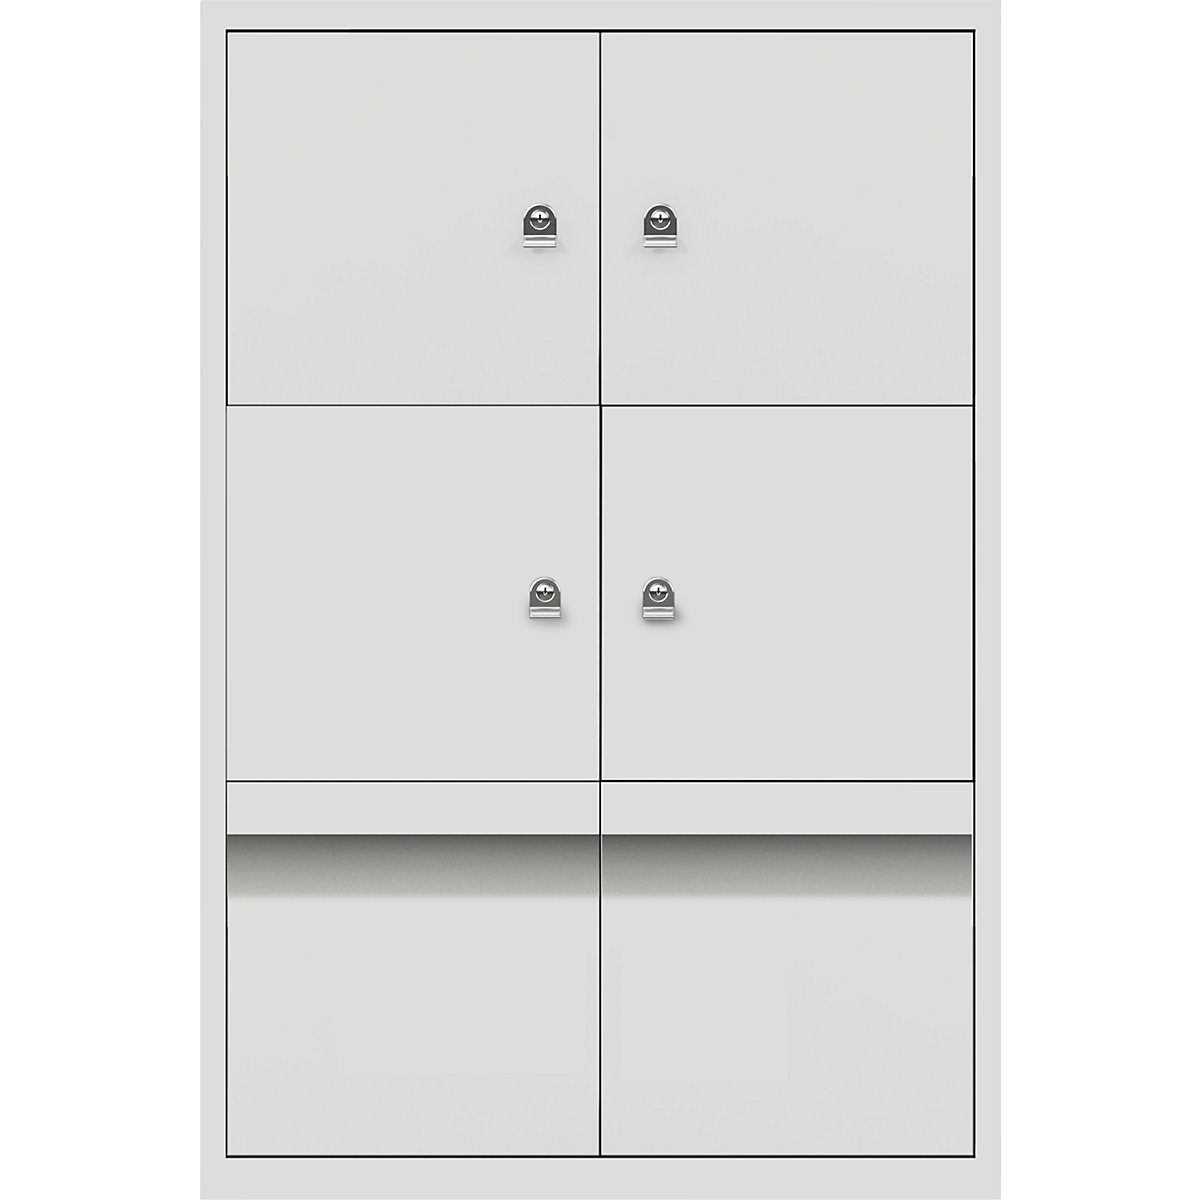 LateralFile™ lodge – BISLEY, with 4 lockable compartments and 2 drawers, height 375 mm each, light grey-5